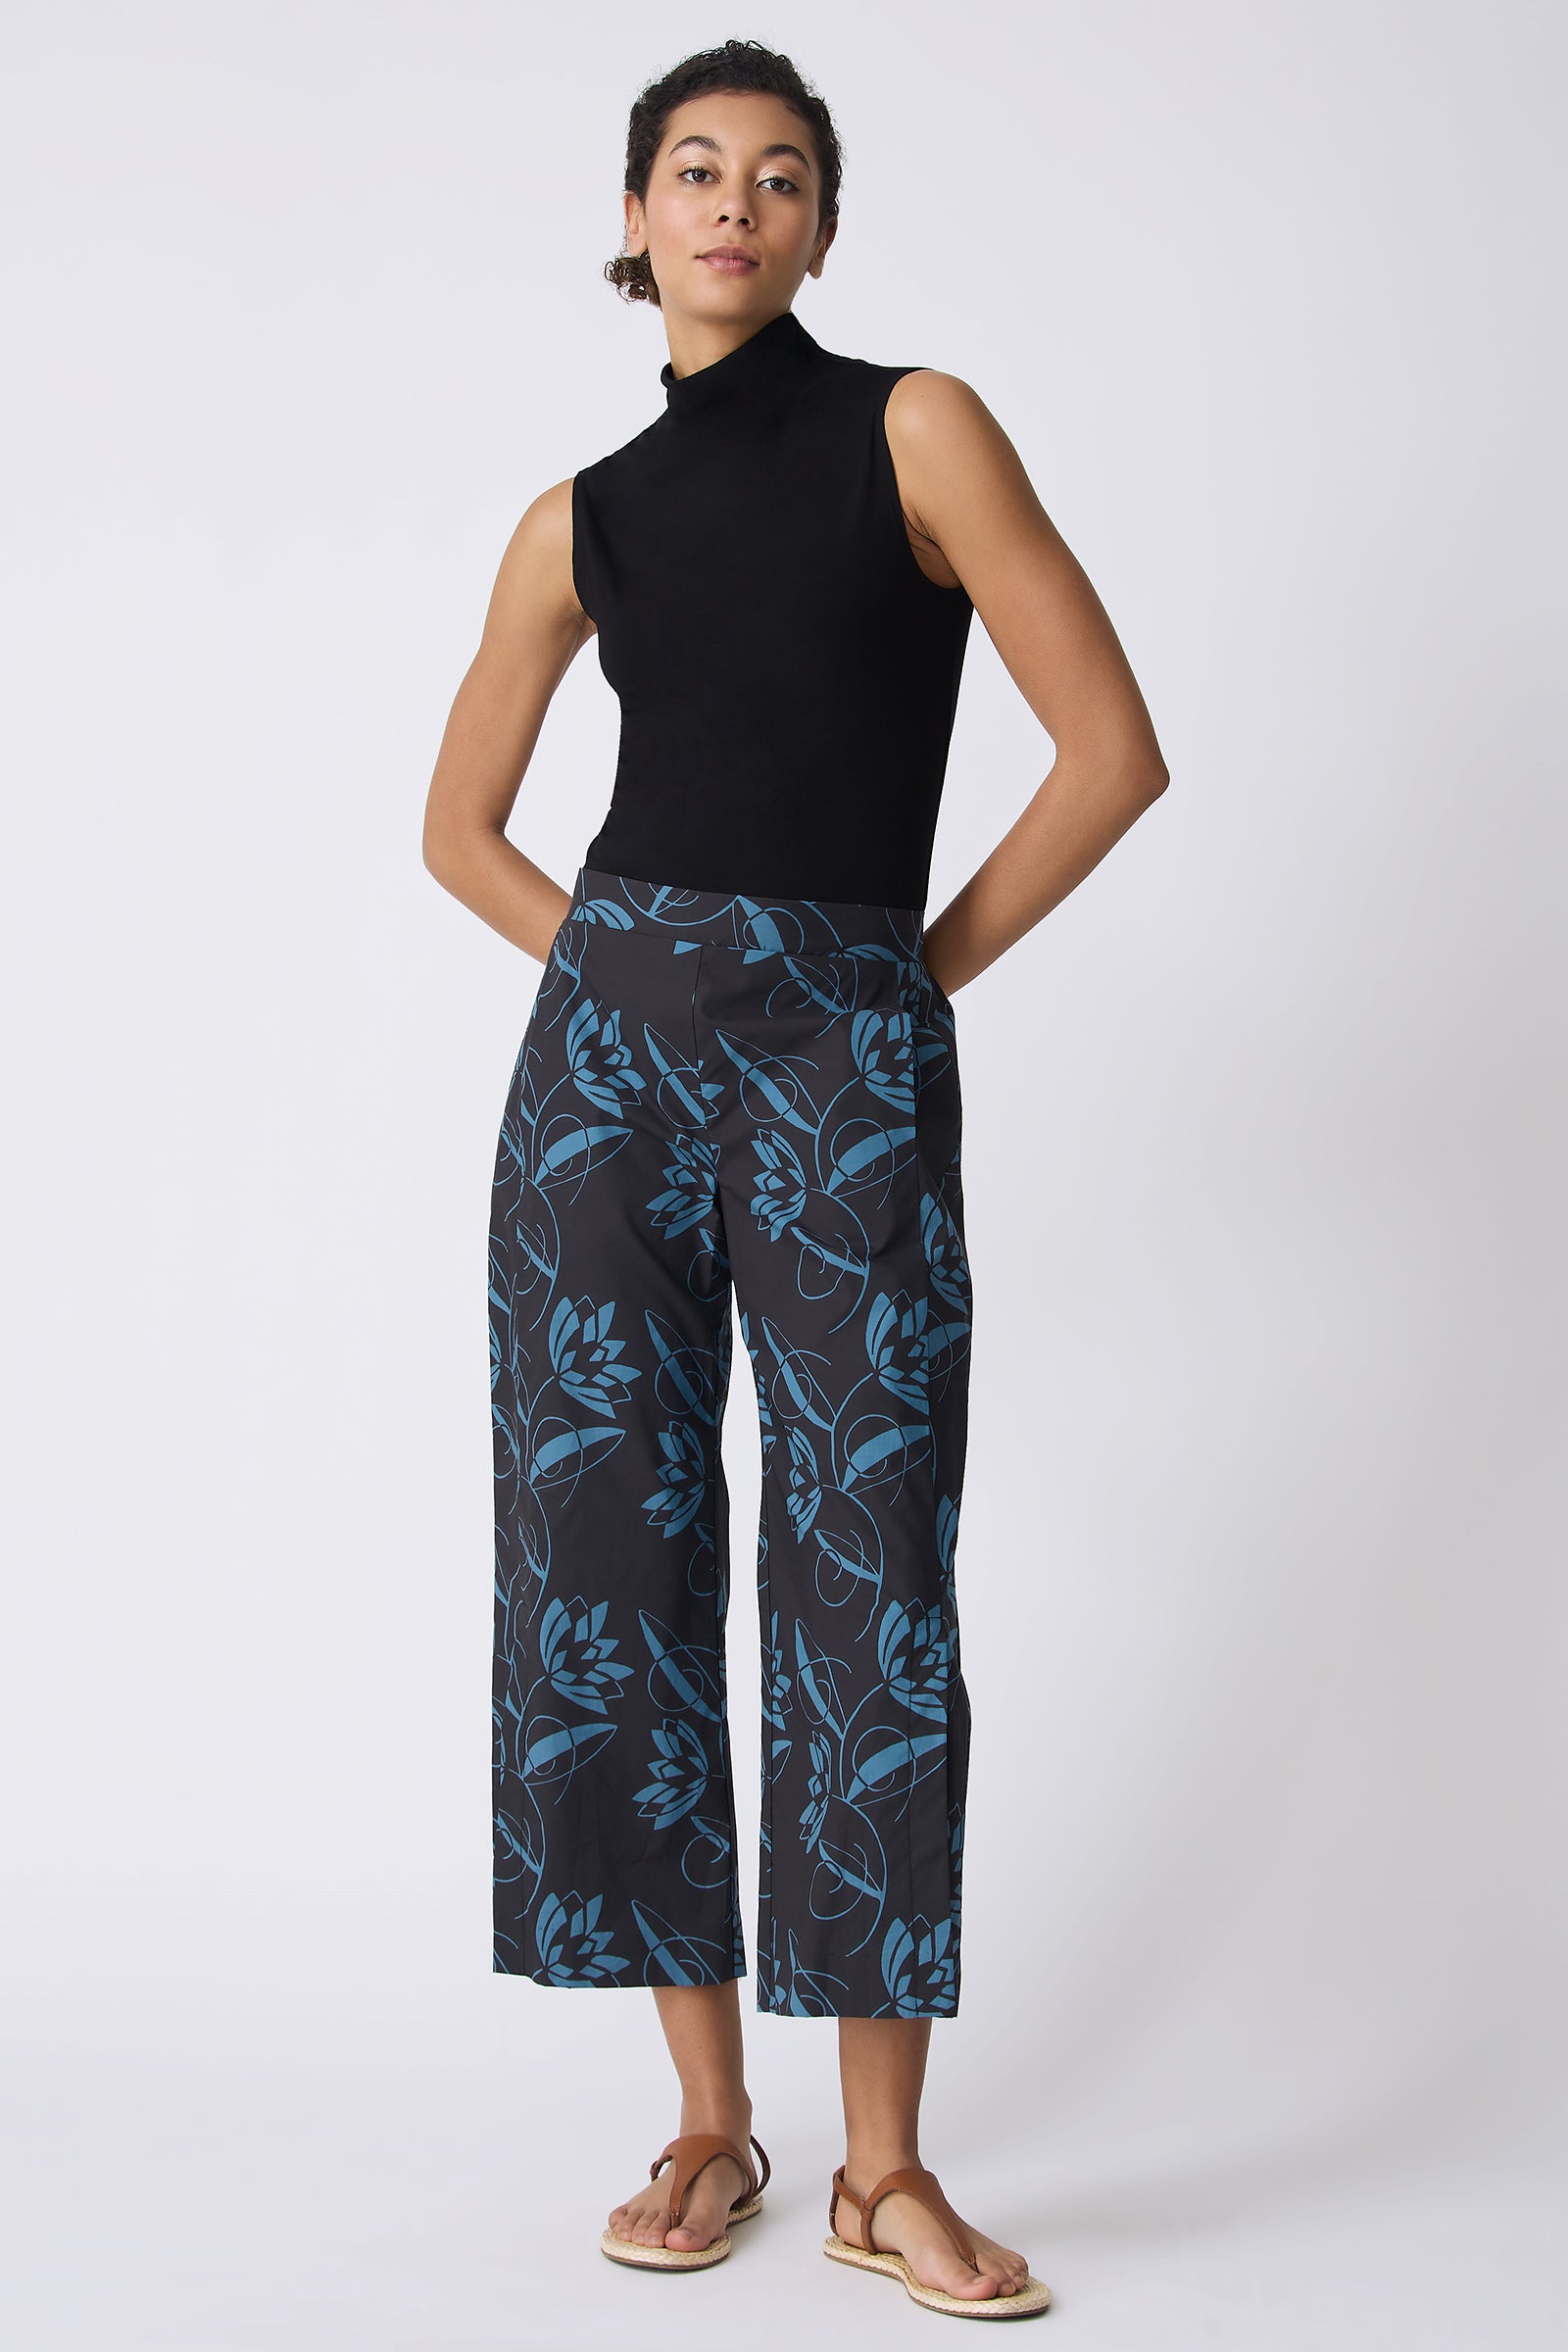 Kal Rieman Tami Side Kick Pant in Lotus Print Blue on model with hands behind back full front view